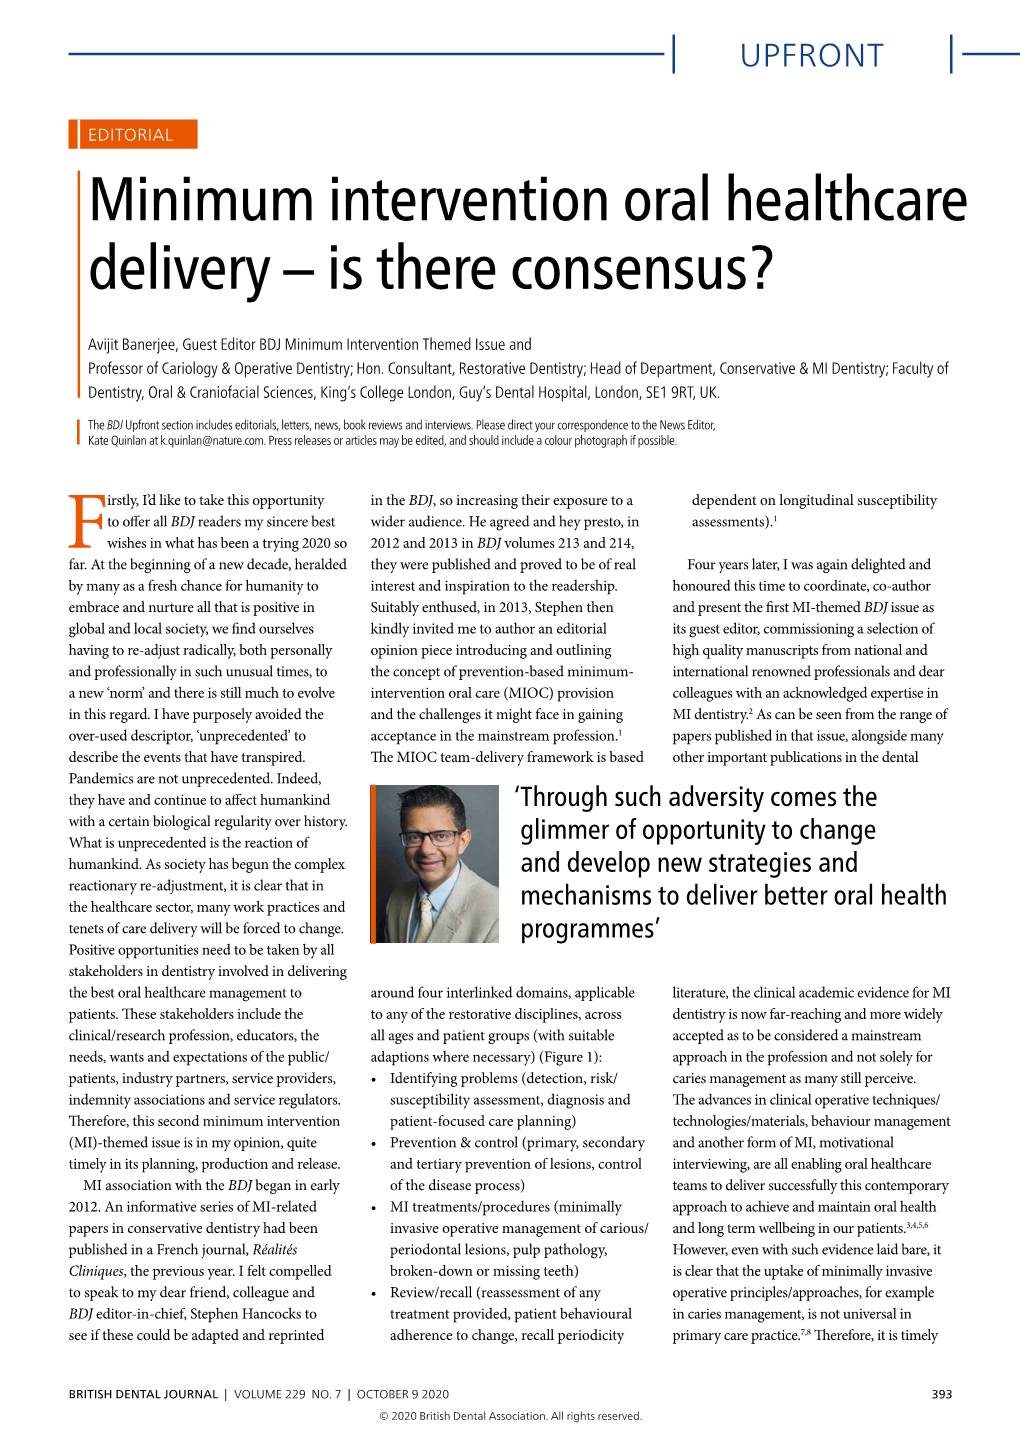 Minimum Intervention Oral Healthcare Delivery – Is There Consensus?